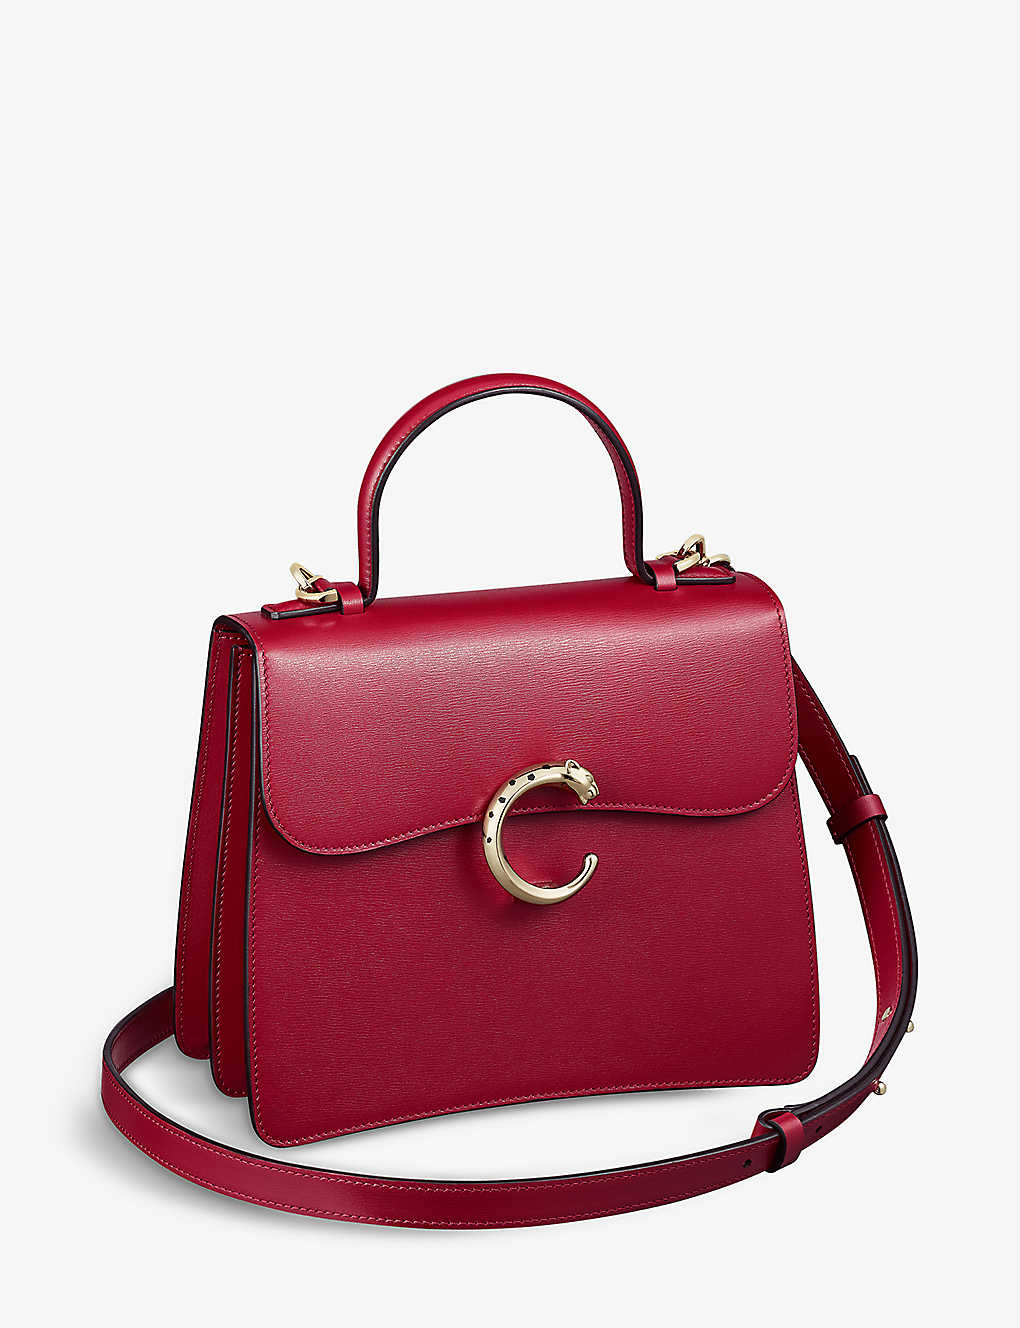 Cartier Womens Cherry Red Panthère De Small Leather Cross-body Bag